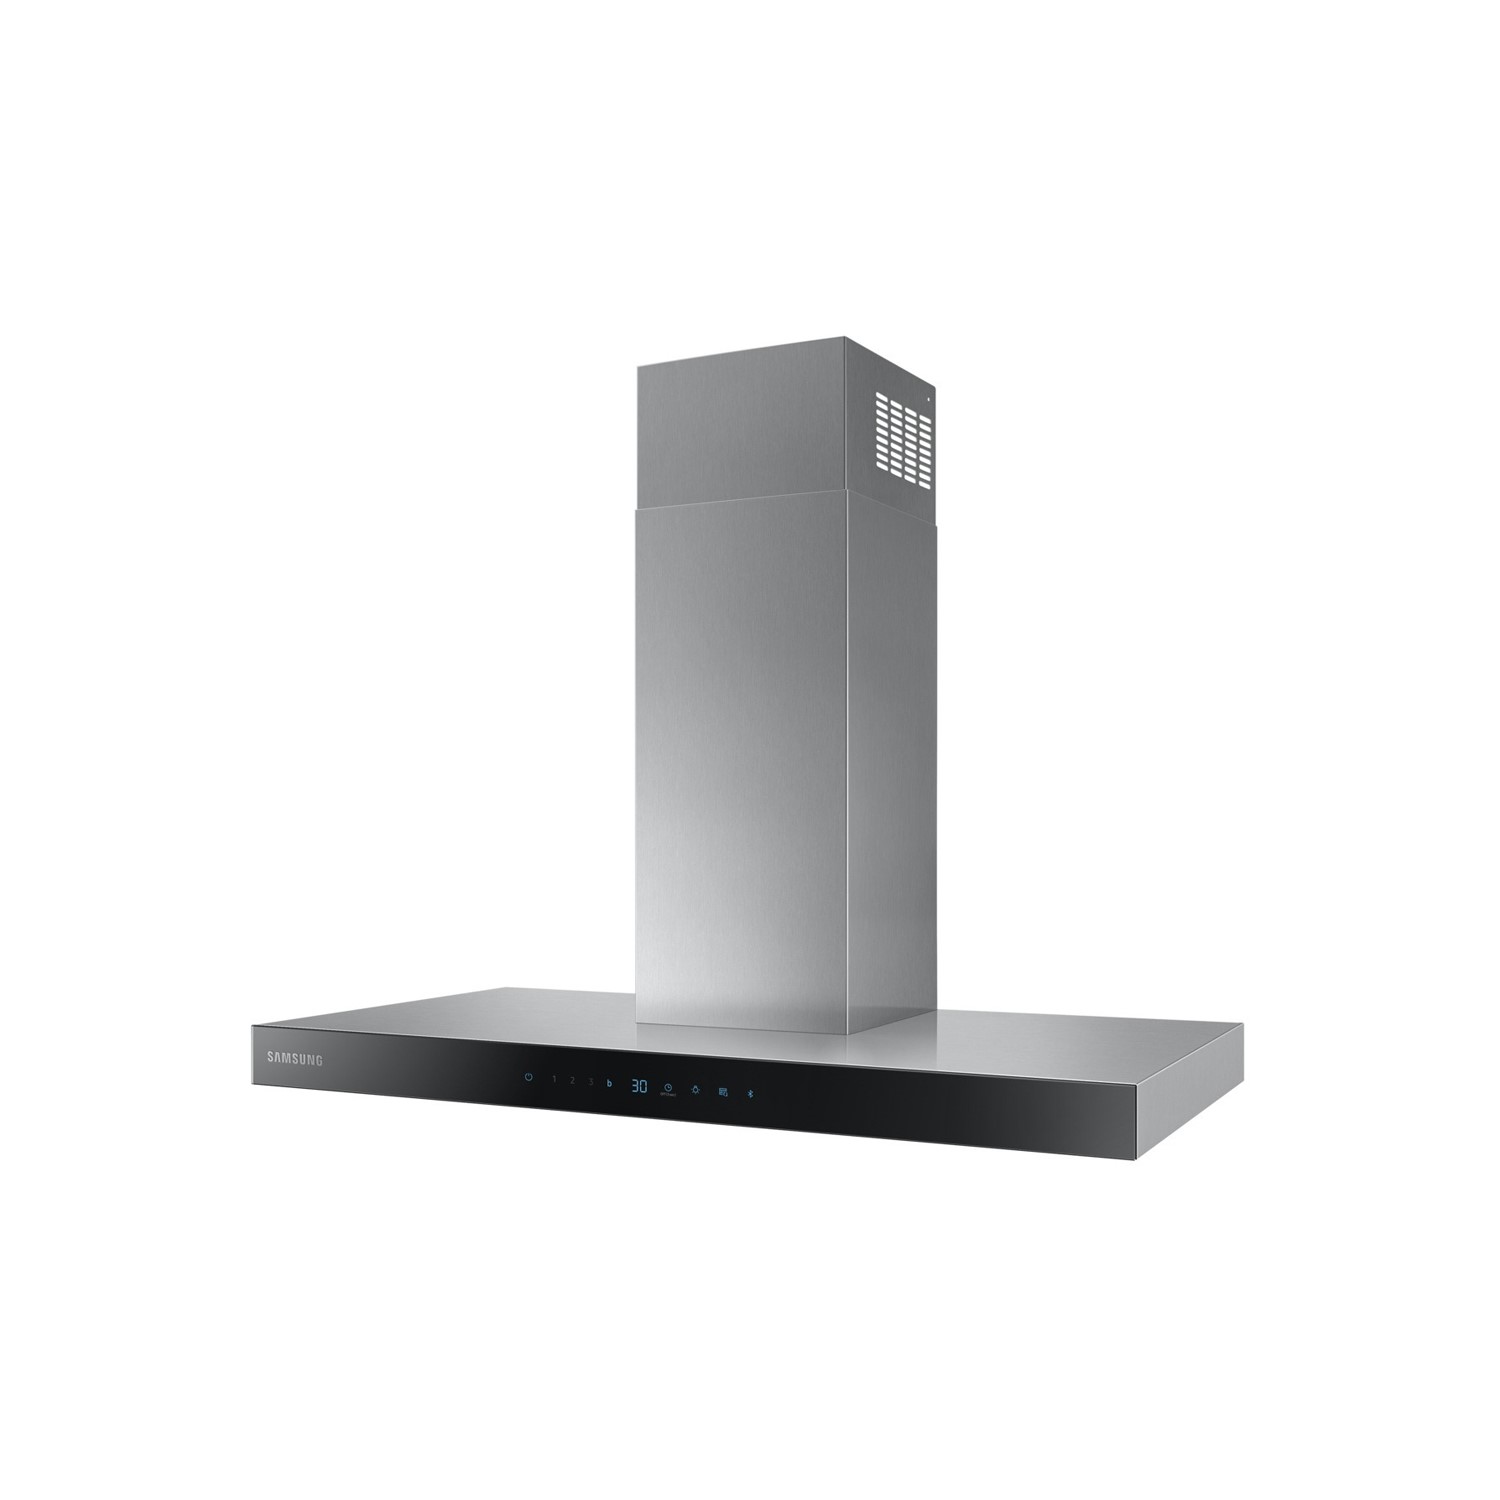 Refurbished Samsung NK36N5703BS 90cm Slimline Chimney Cooker Hood with Auto Connectivity Stainless S